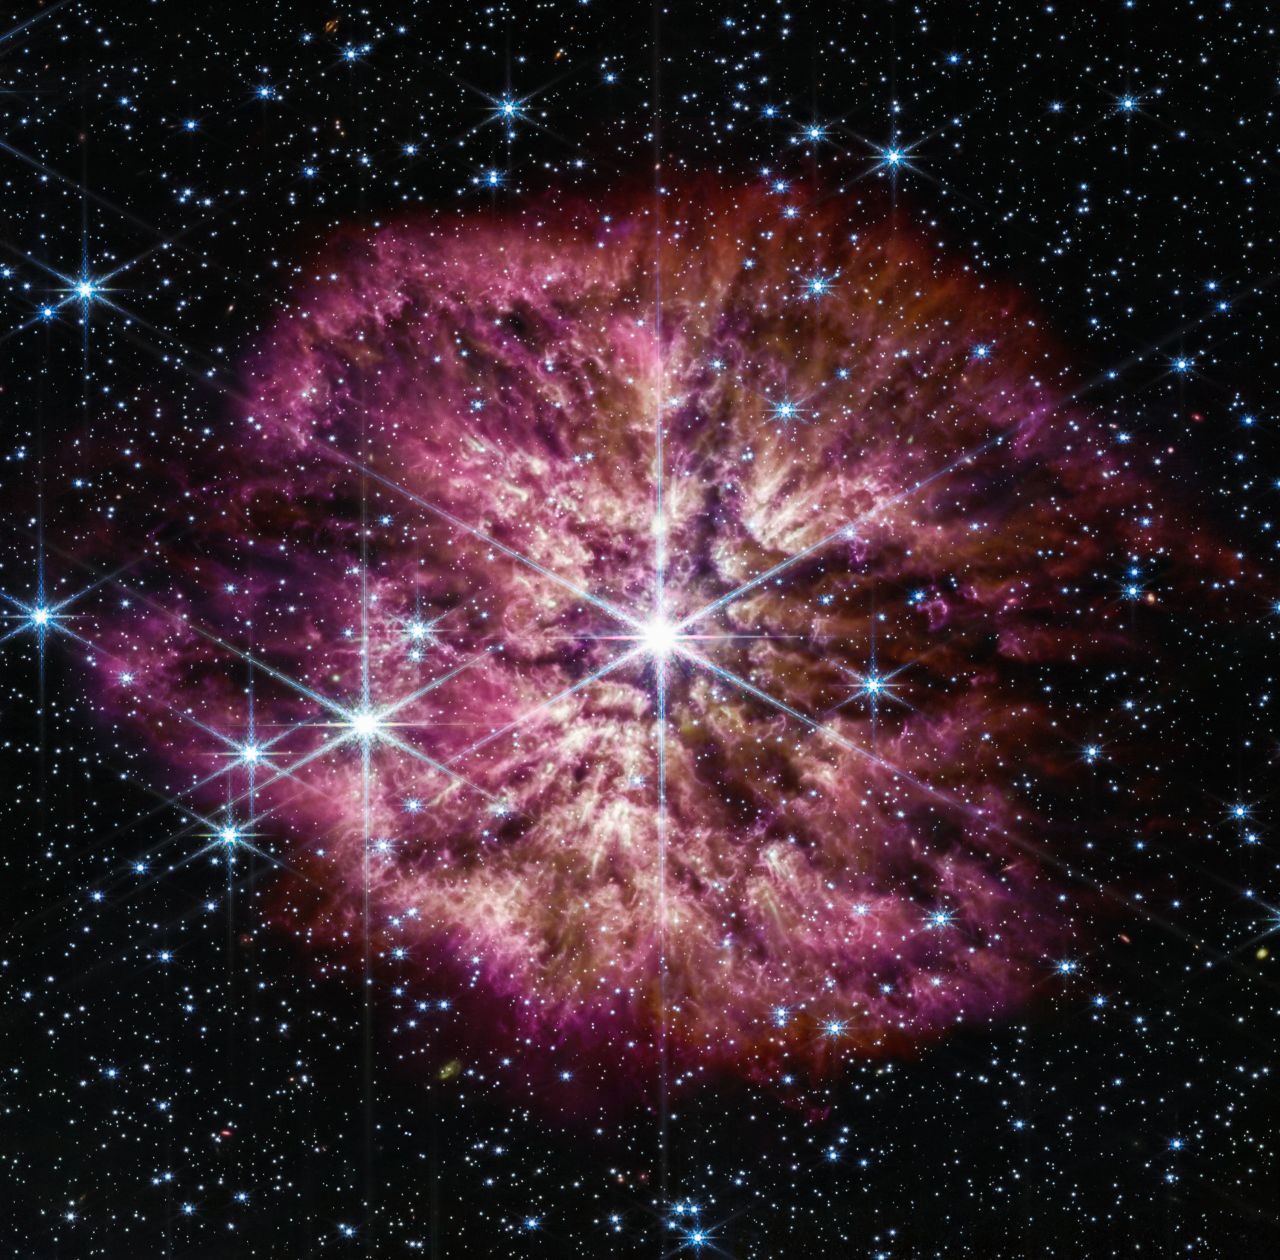 A new image released on Tuesday, March 14, from NASA's James Webb Telescope, shows the Wolf-Rayet star WR 124 captured in infrared light. Wolf-Rayet stars are some of the most luminous and massive stars in the universe.